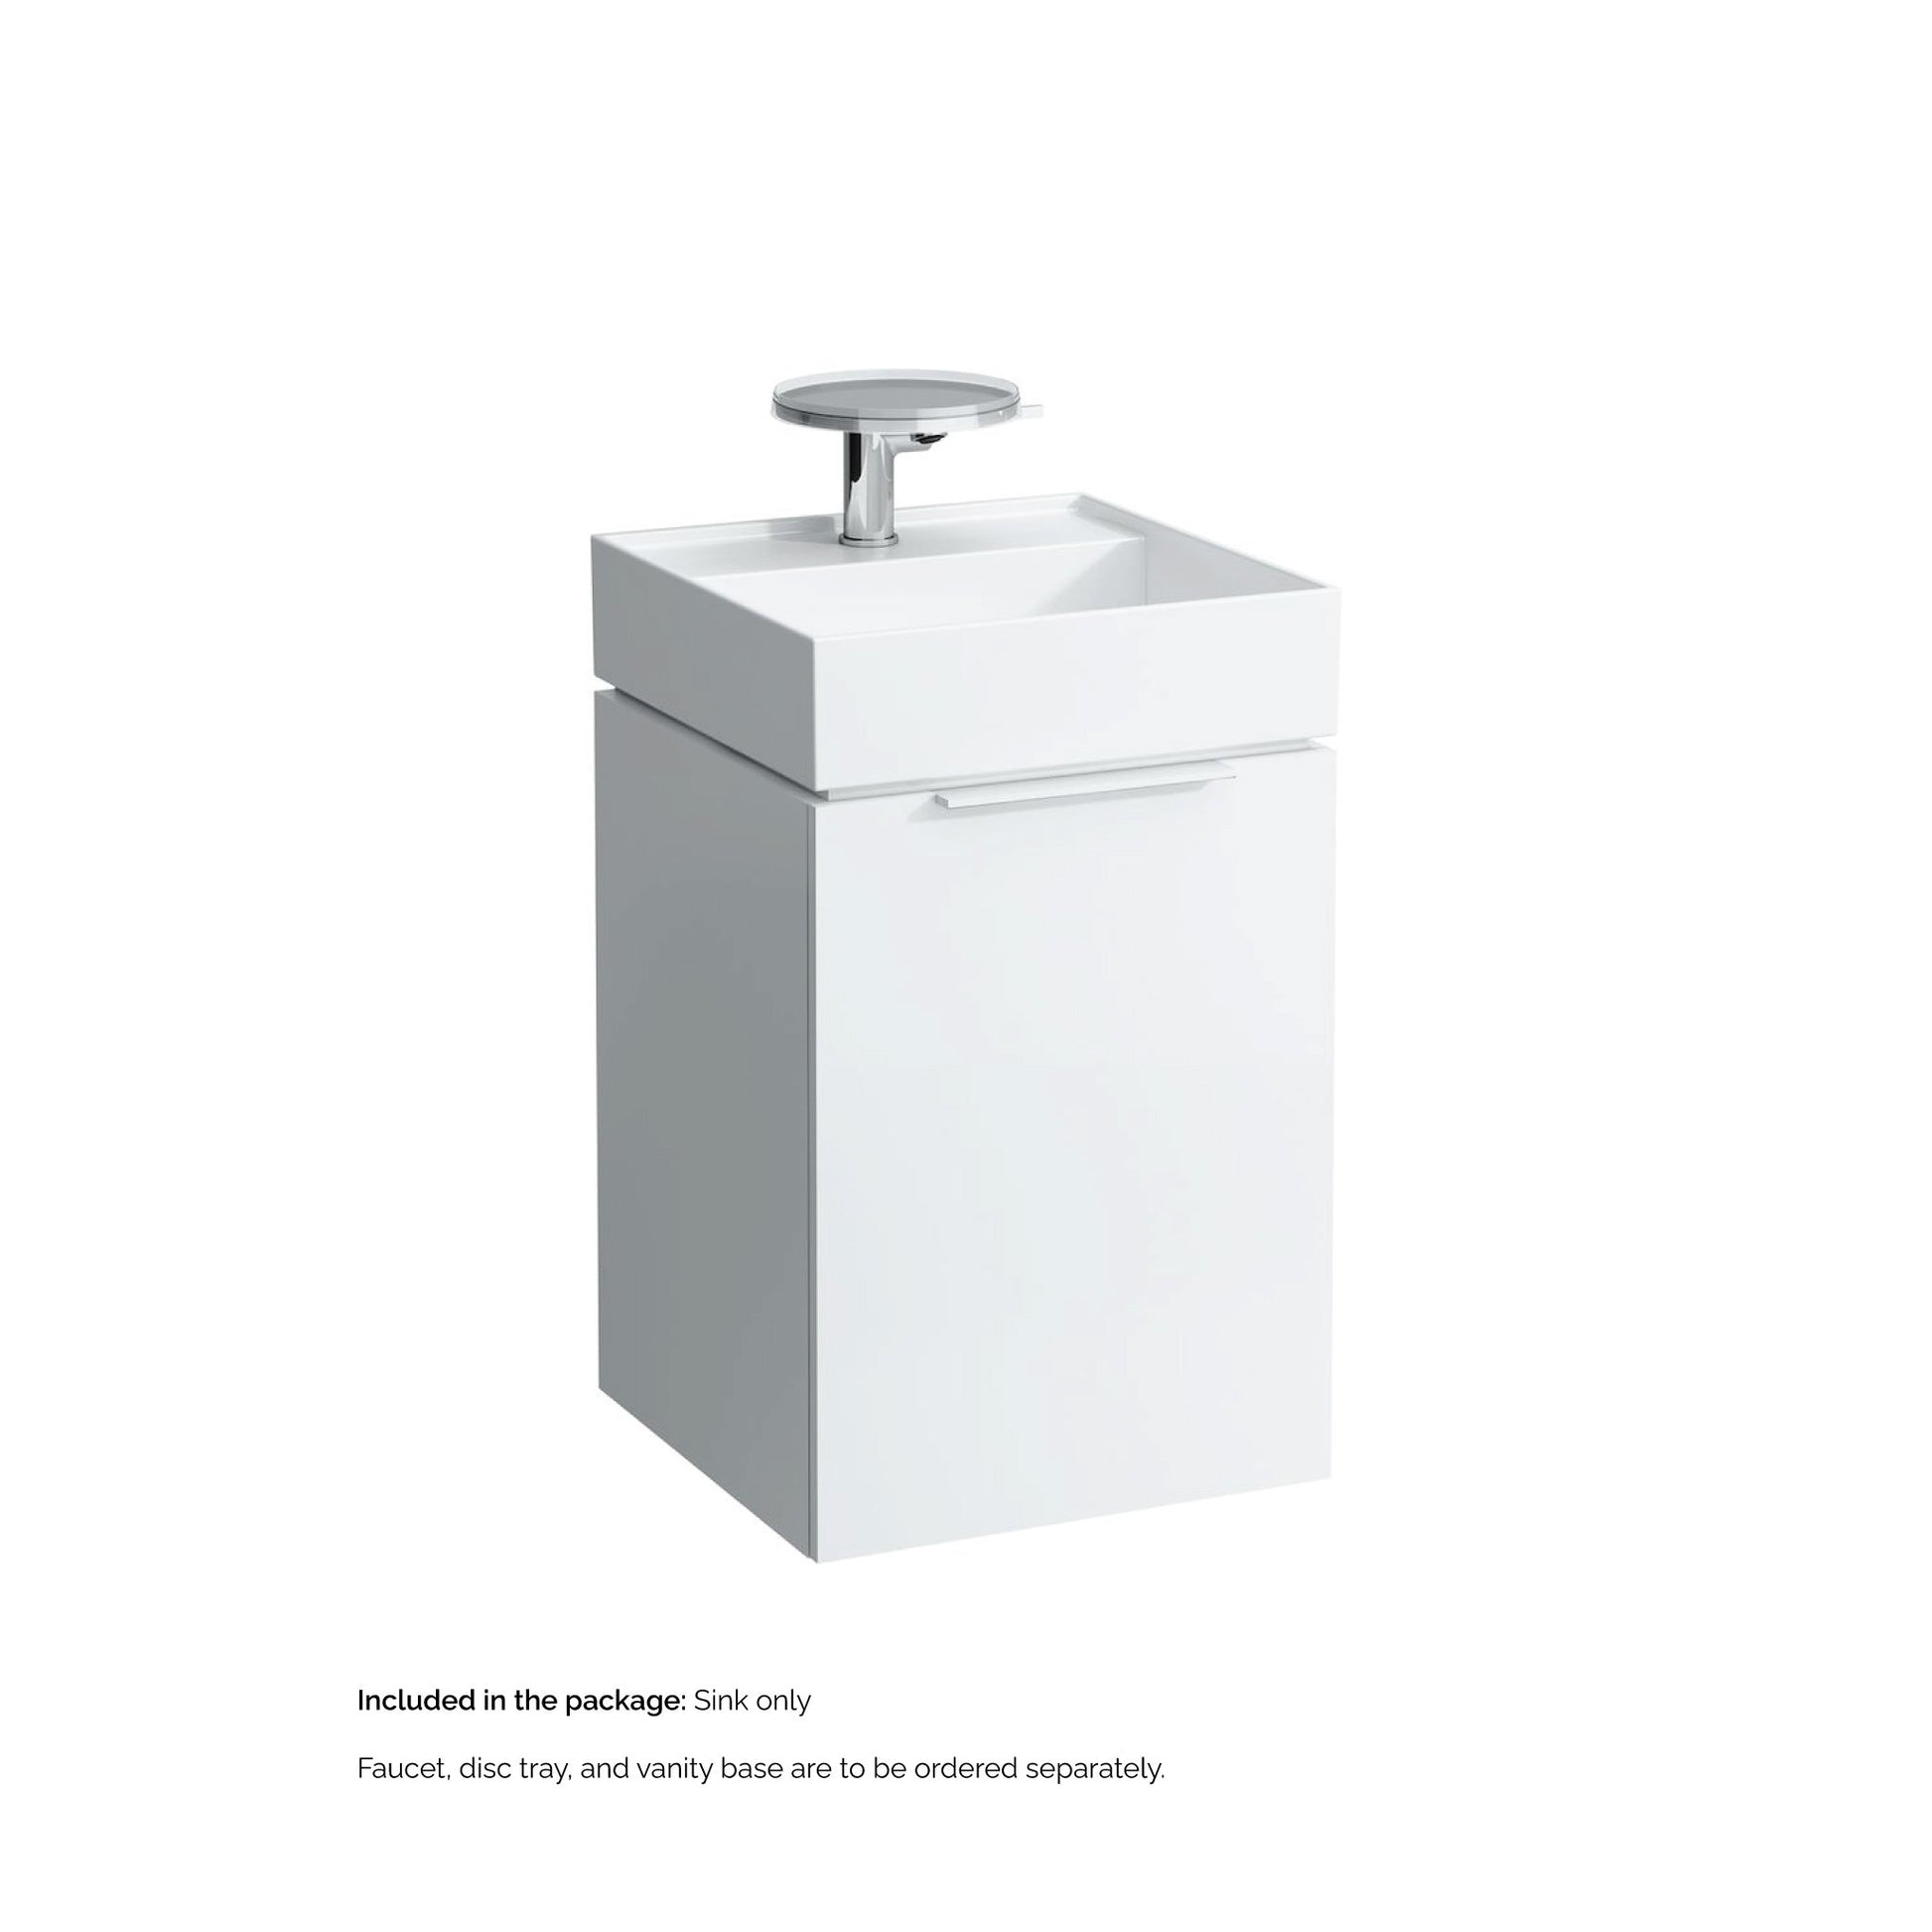 Laufen Kartell 18" x 18" White Wall-Mounted Bathroom Sink With Faucet Hole